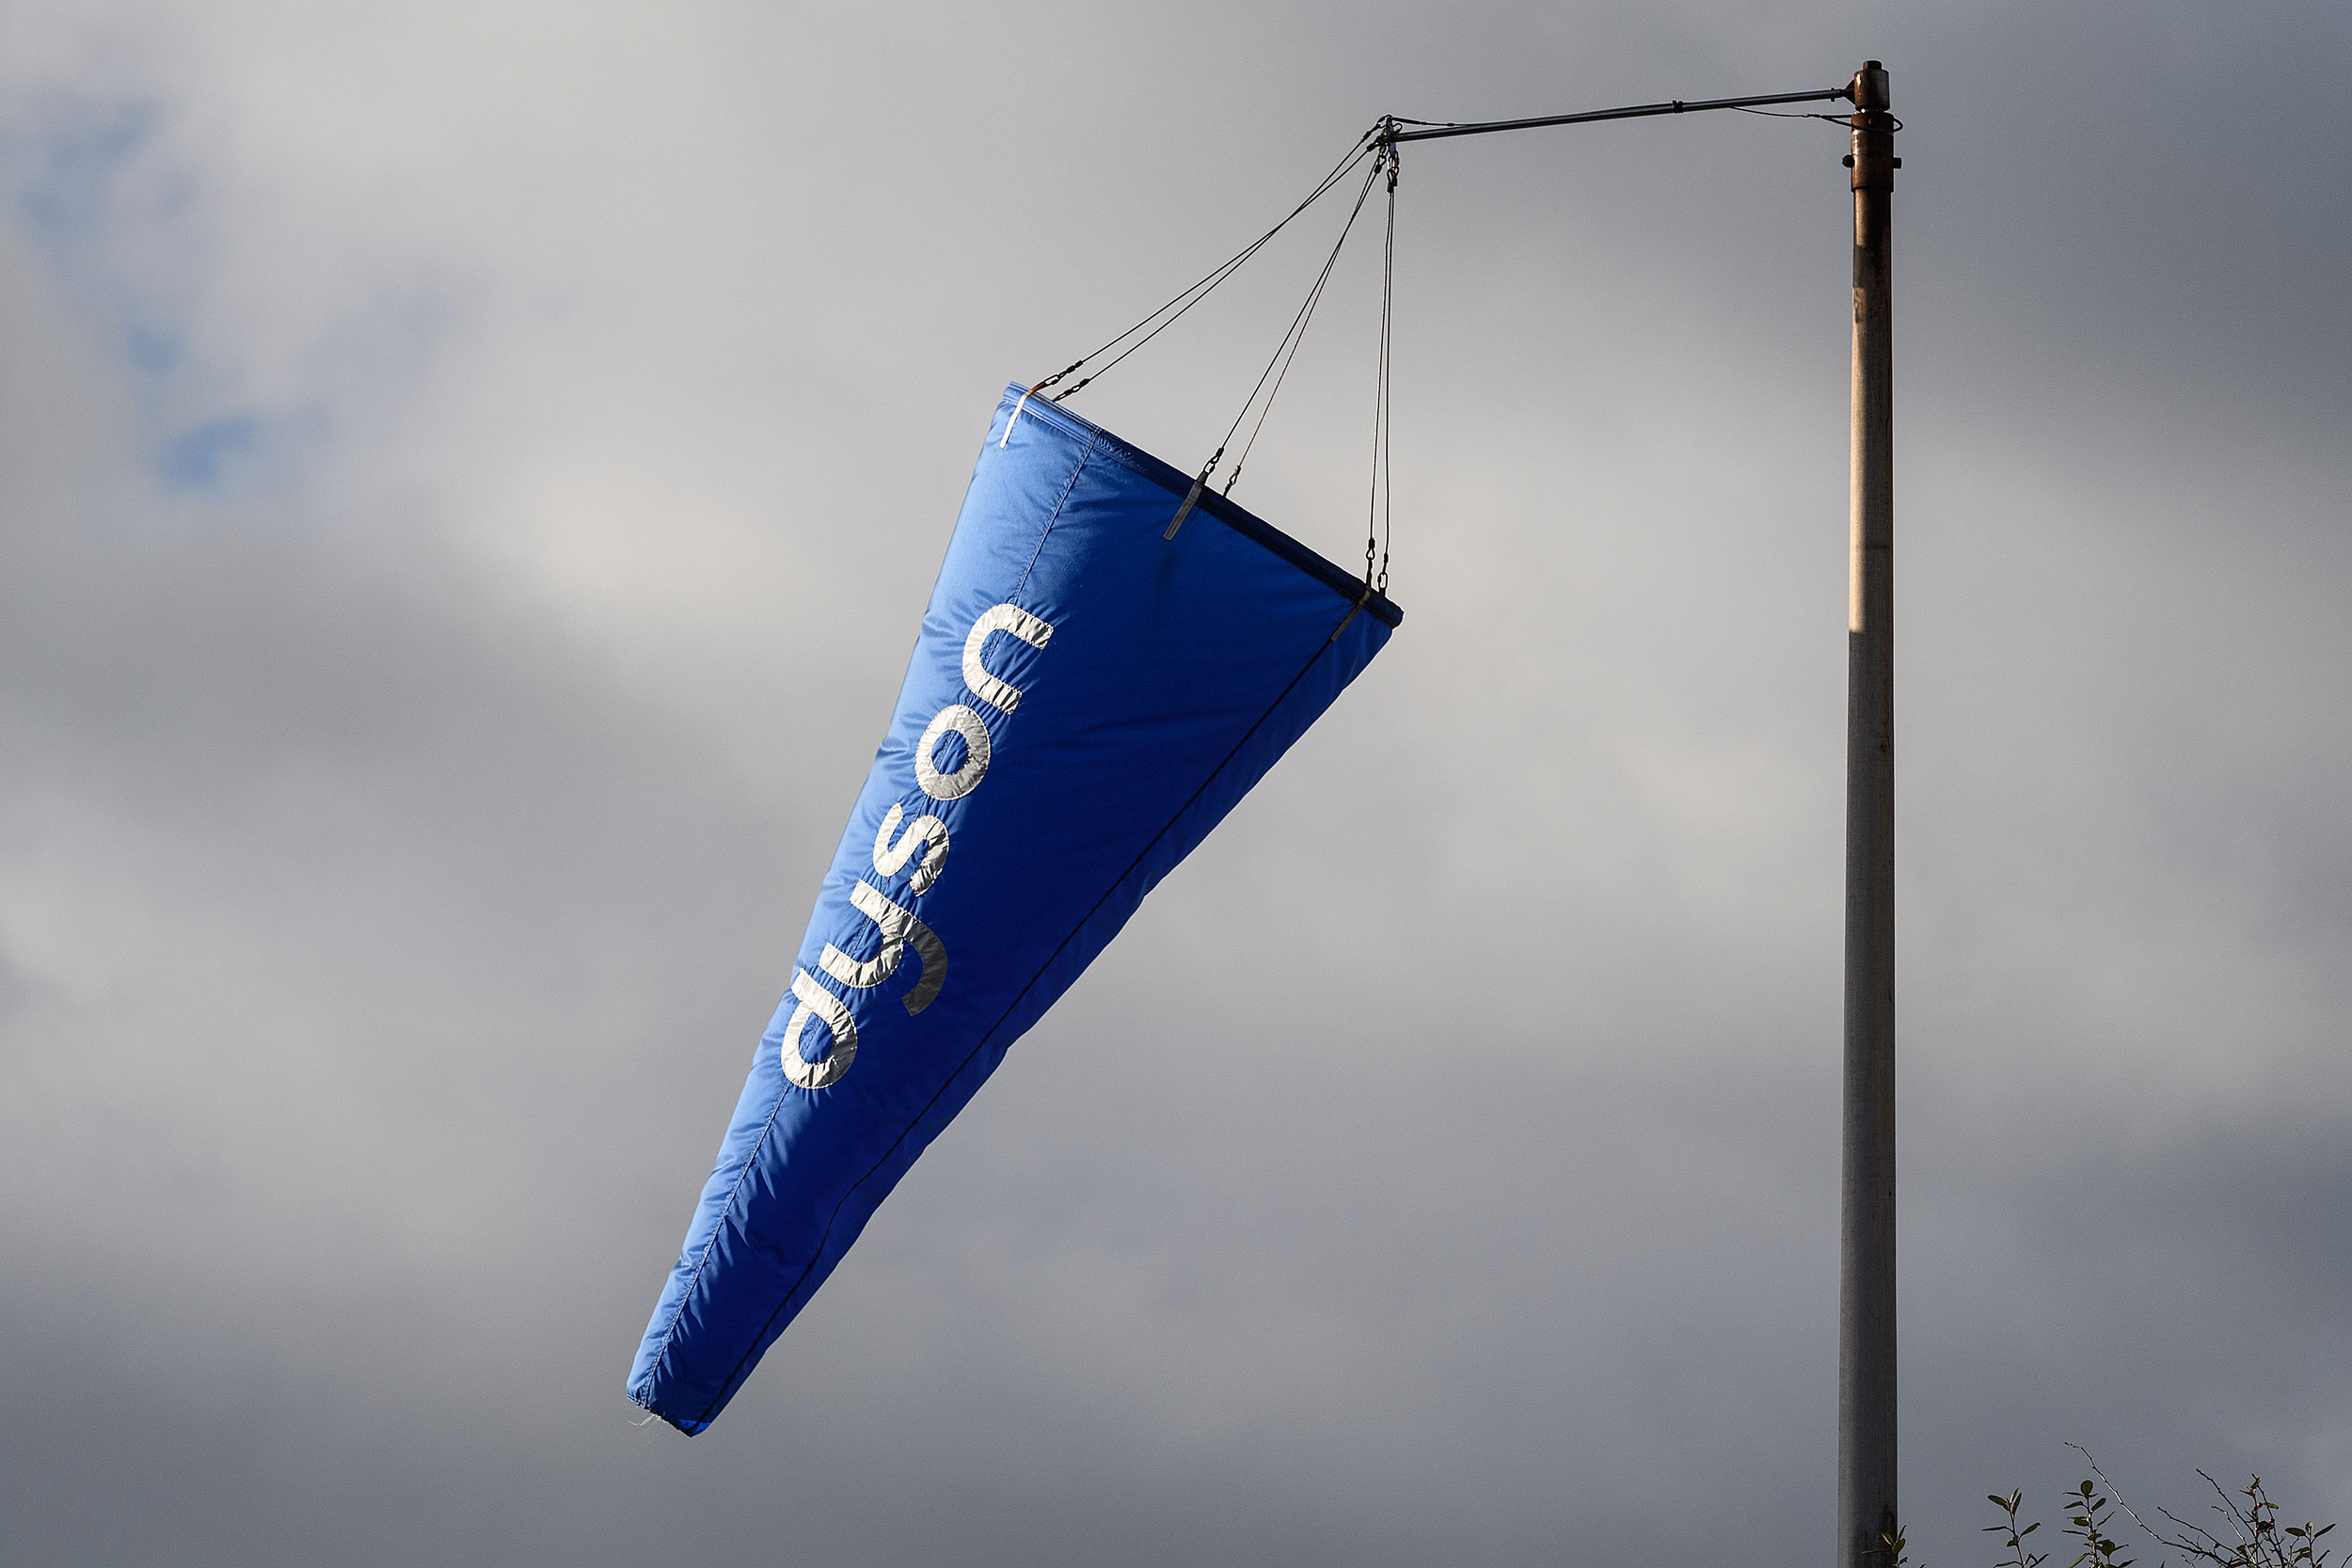 A windsock flies outside of the Dyson headquarters in Malmesbury, England.